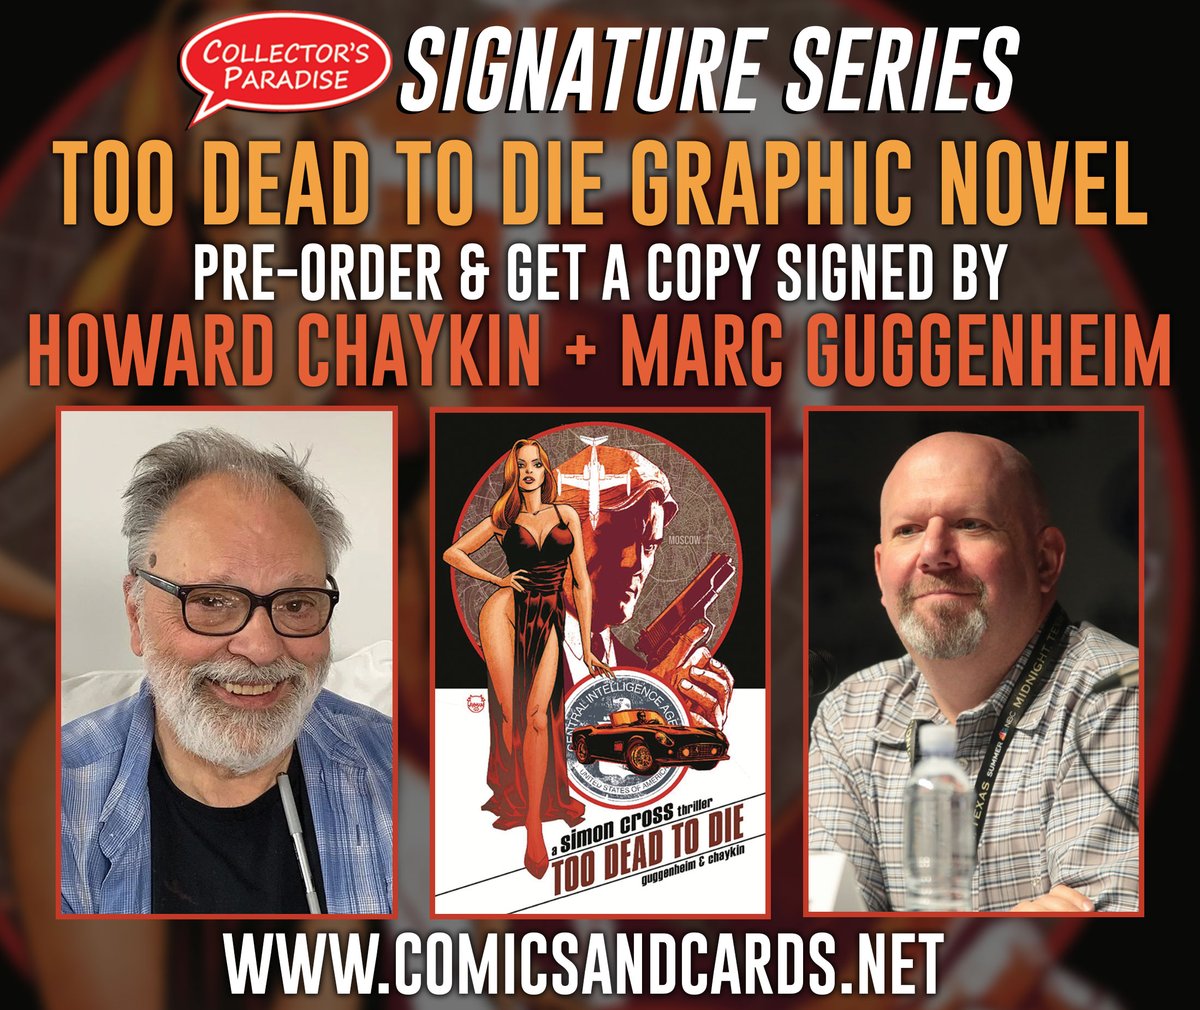 🖊HOWARD CHAYKIN + MARC GUGGENHEIM SIGNATURE SERIES🖊 Get TOO DEAD TO DIE OGN signed by Howard Chaykin & @mguggenheim + a C.O.A. for ONLY COVER PRICE by pre-ordering it on our website: bit.ly/toodeadtp 🔴Local pick-up & mail order options available.